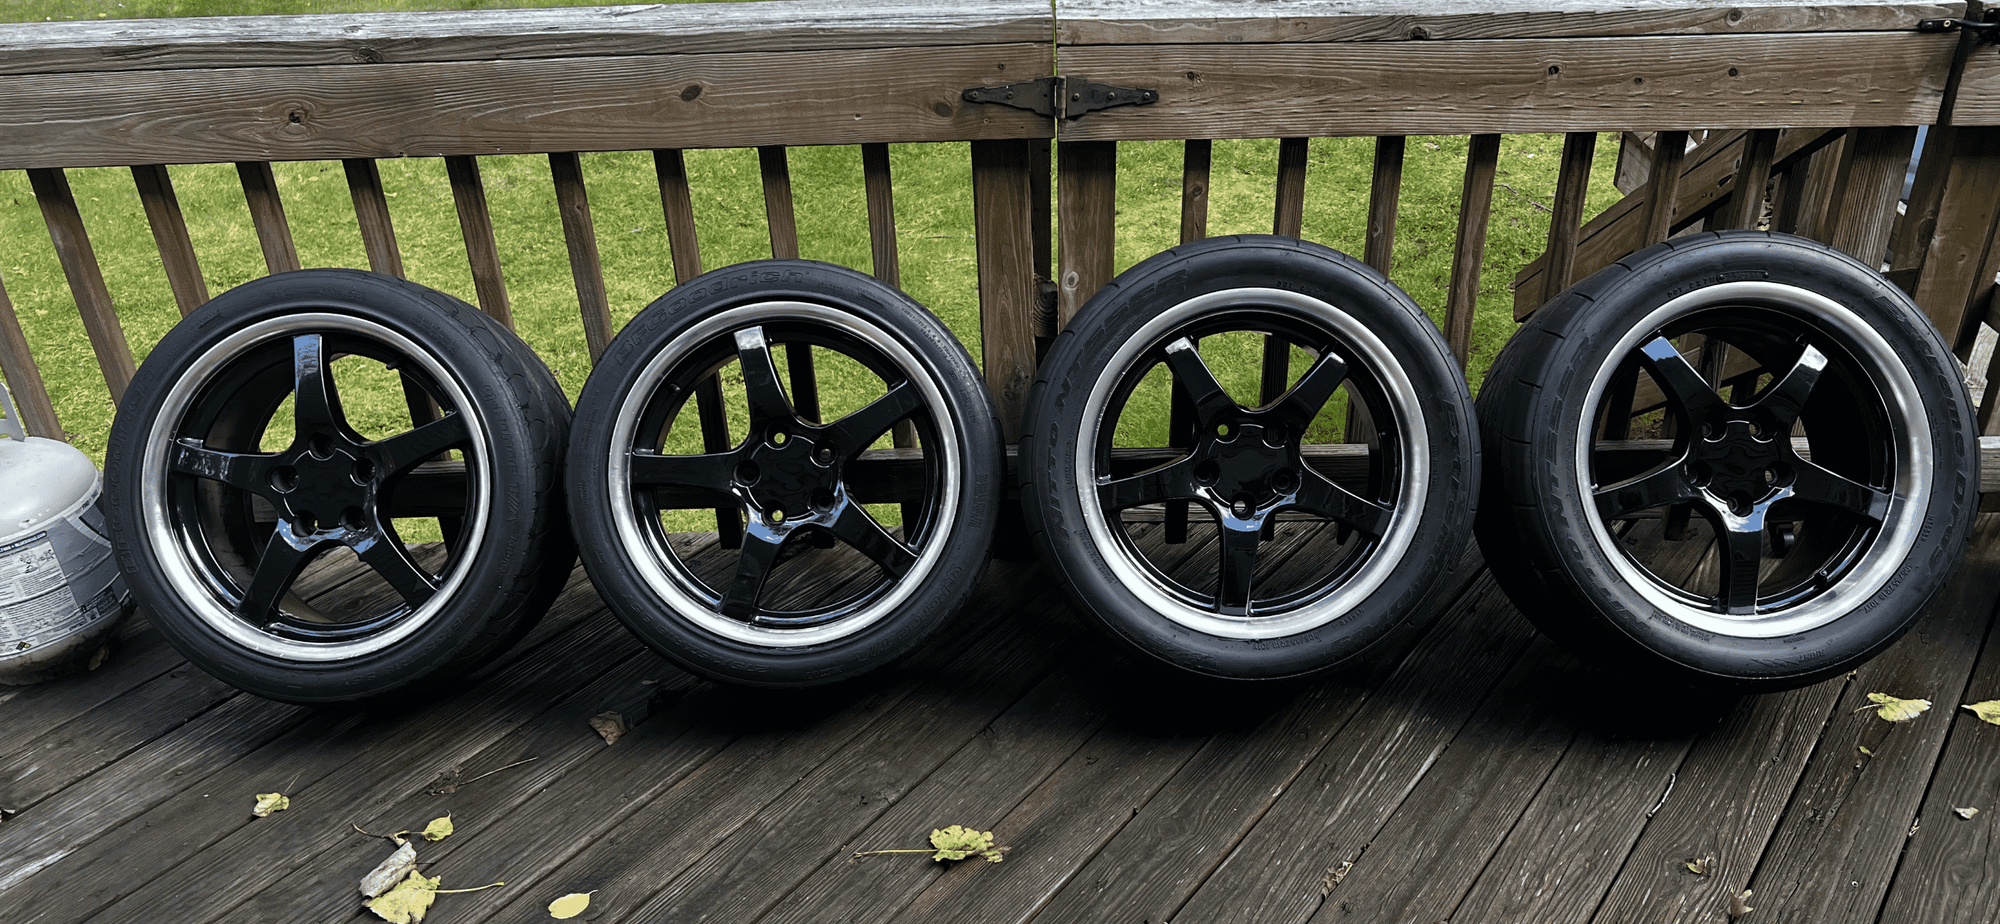 Wheels and Tires/Axles - C5 Replica wheels. 18x10.5" and 18x9.5" with NT555R - Used - 0  All Models - Shelton, CT 06484, United States